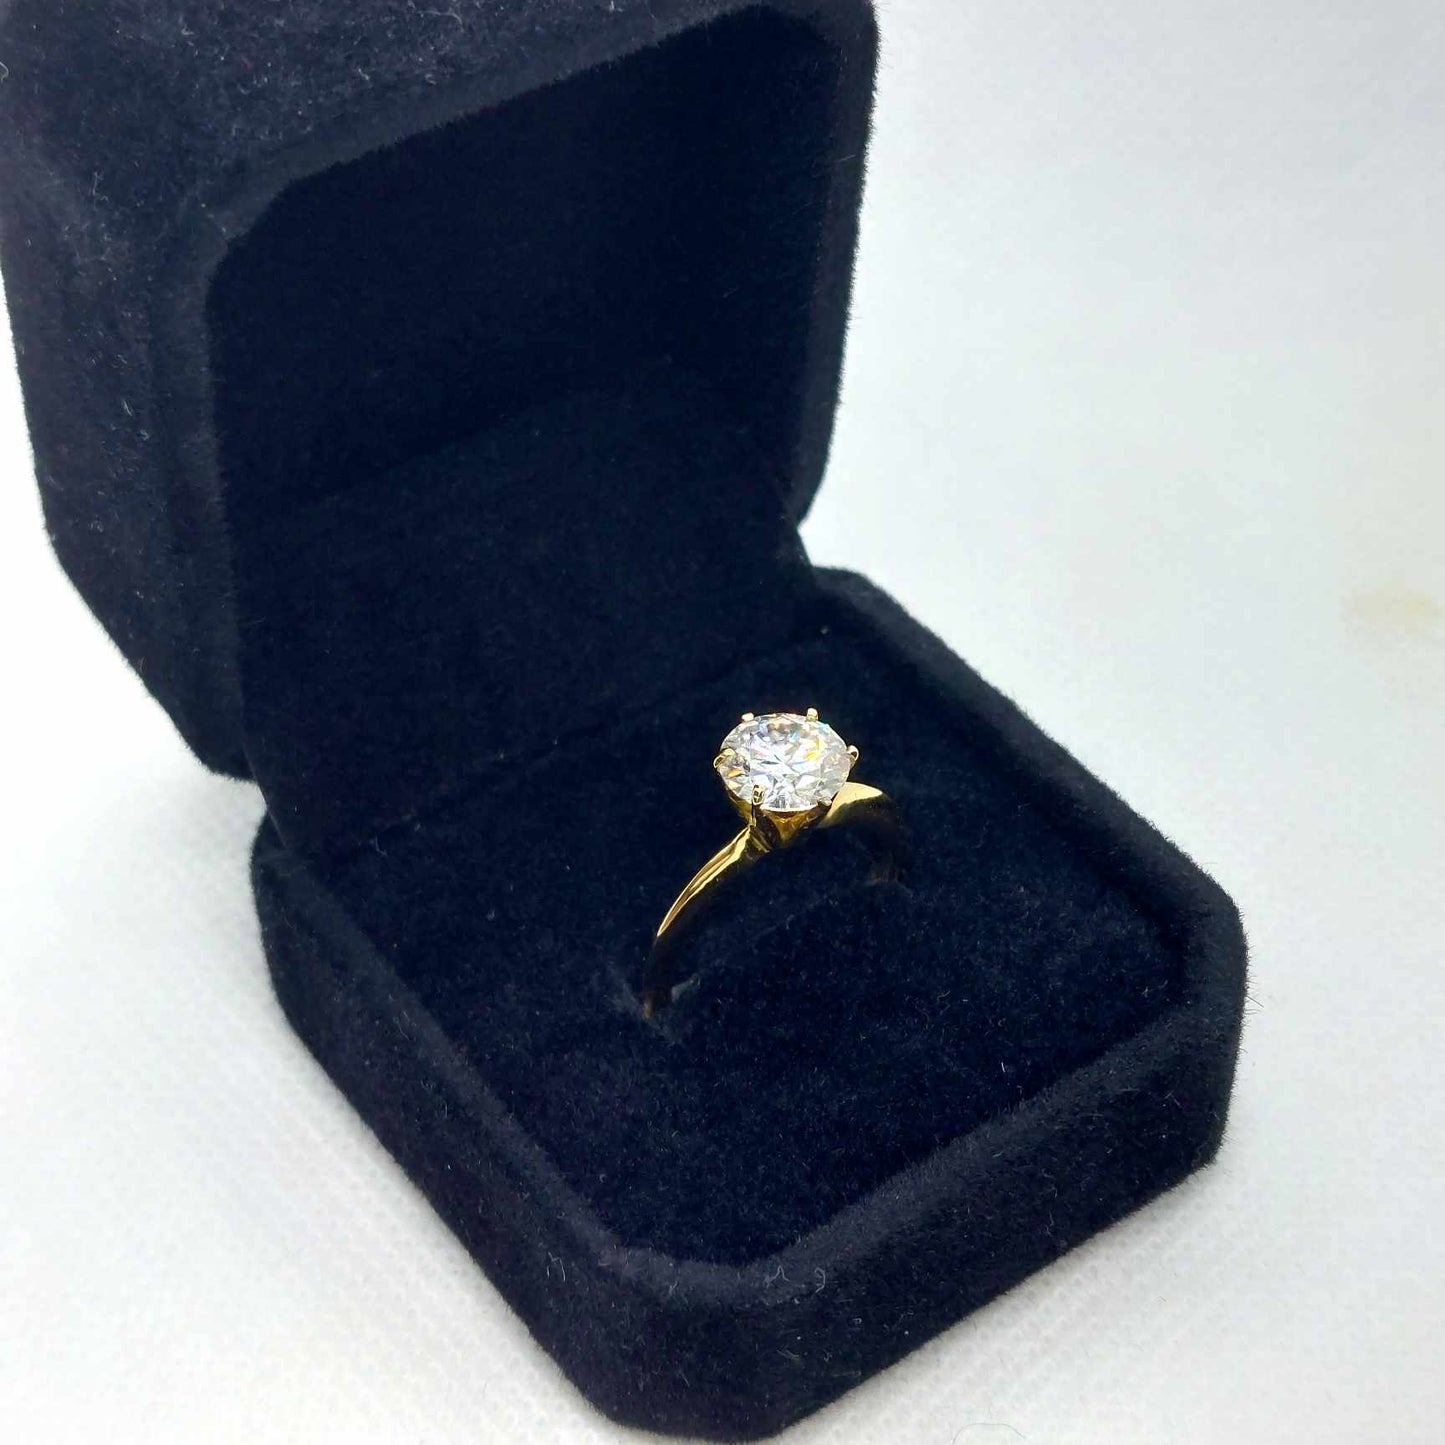 2ct Moissanite Diamond Ring in Solid 18K Gold and Made in Belgium